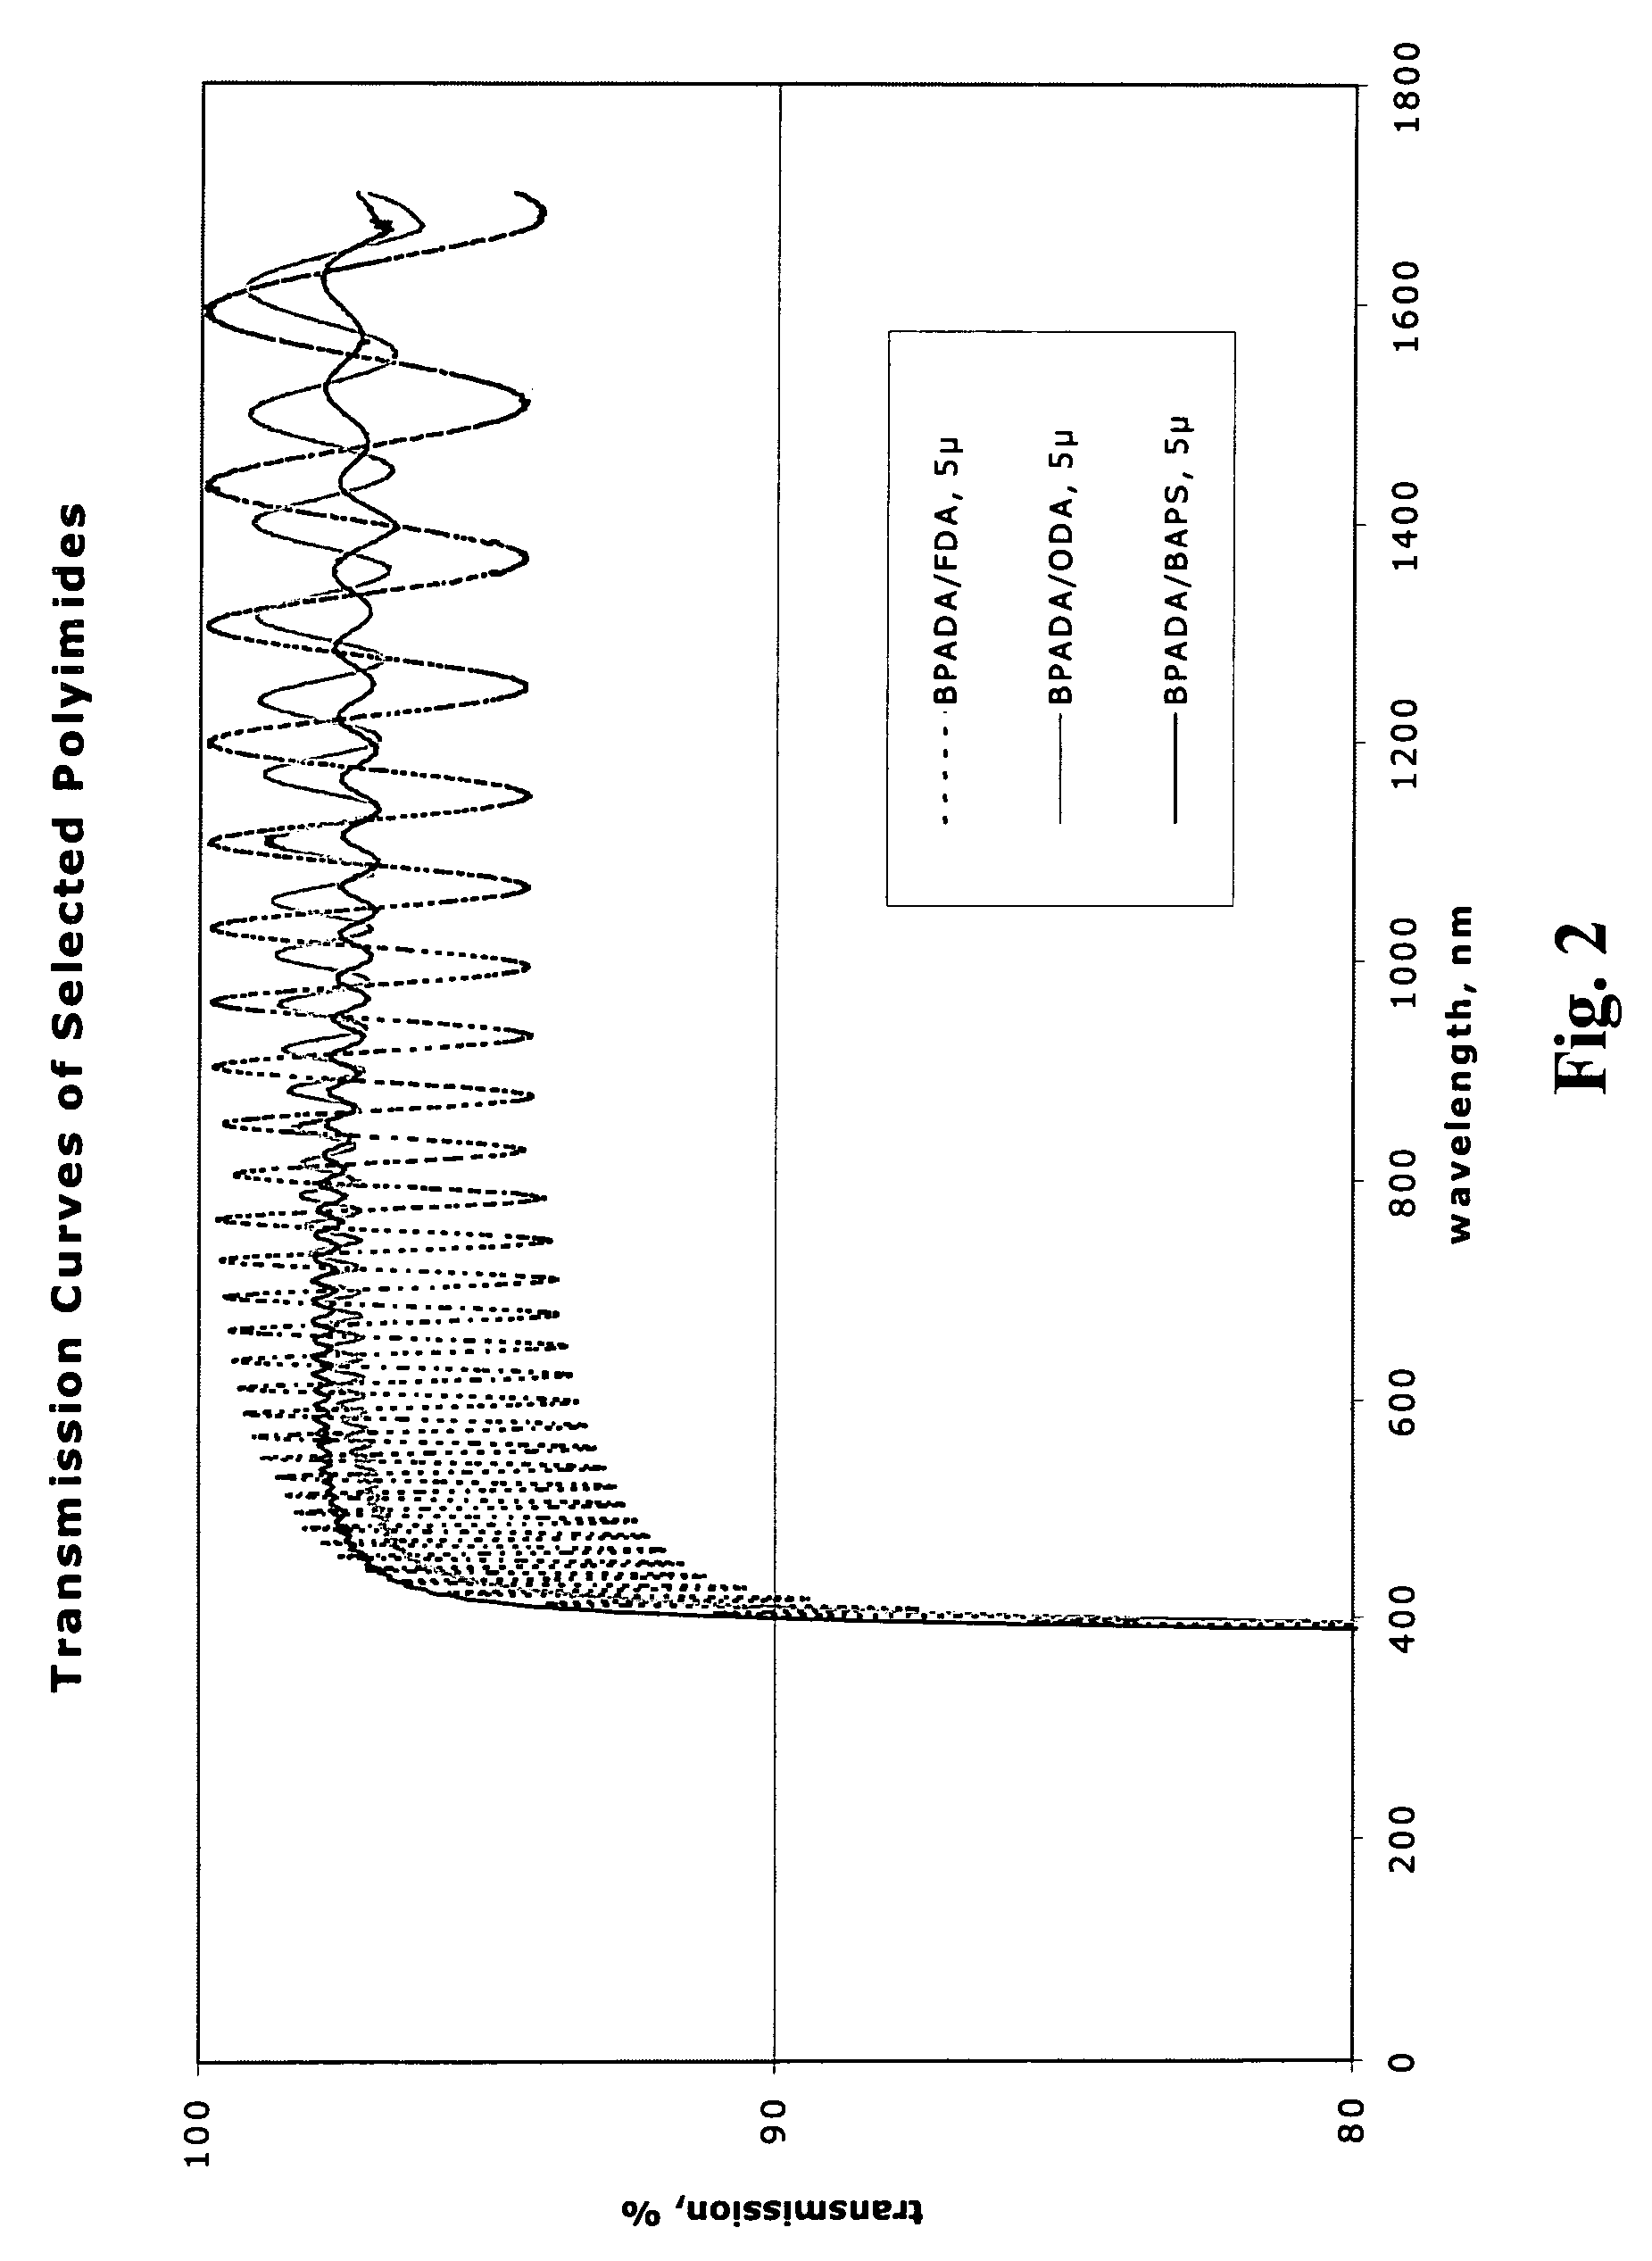 Polyimides for use as high refractive index, thin film materials